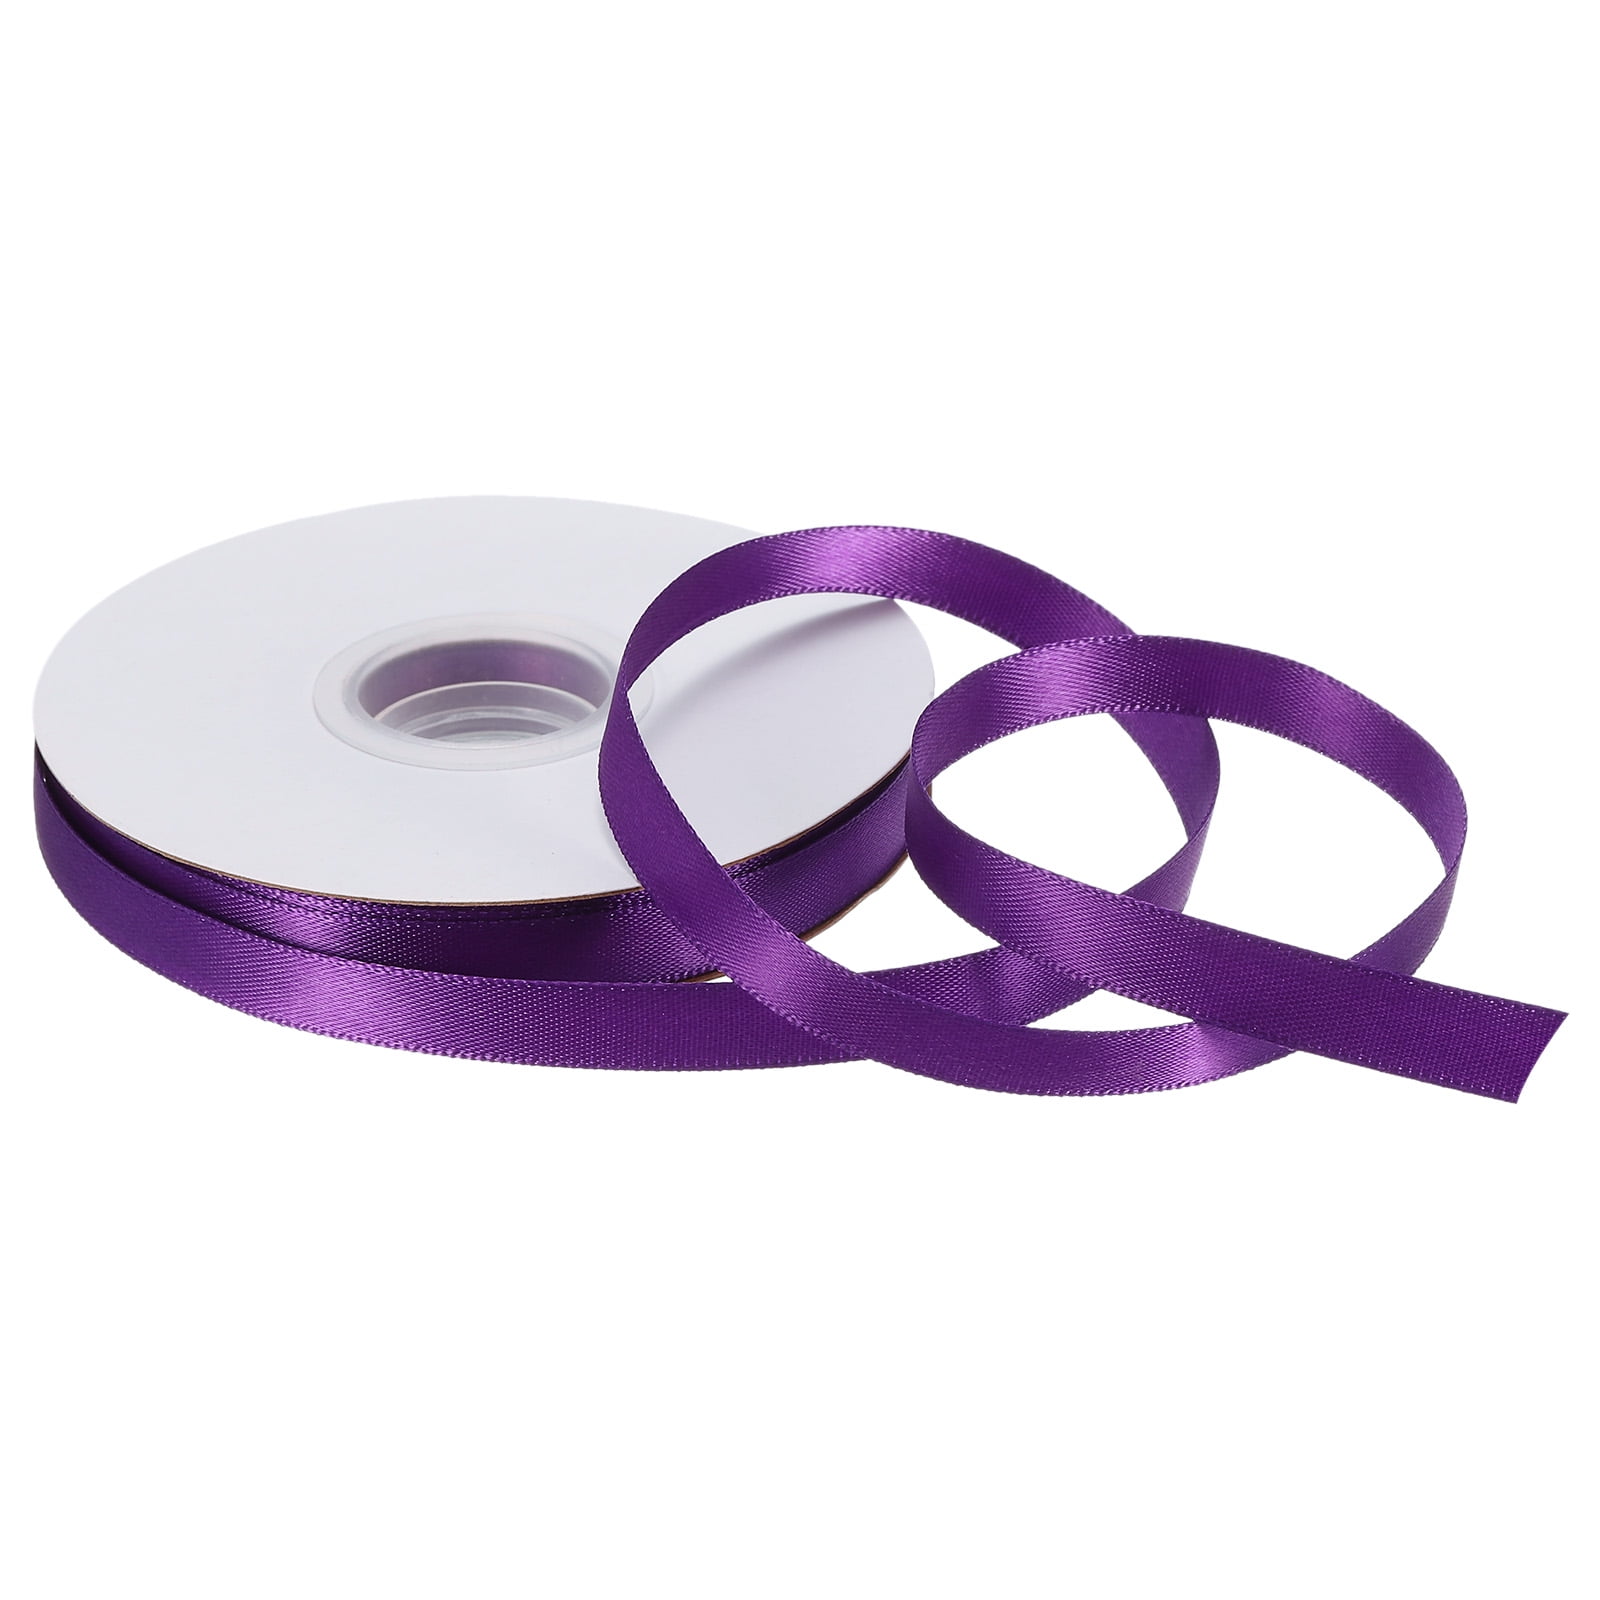  3/8 inch Satin Ribbons Assorted Colors (Solid Bright)